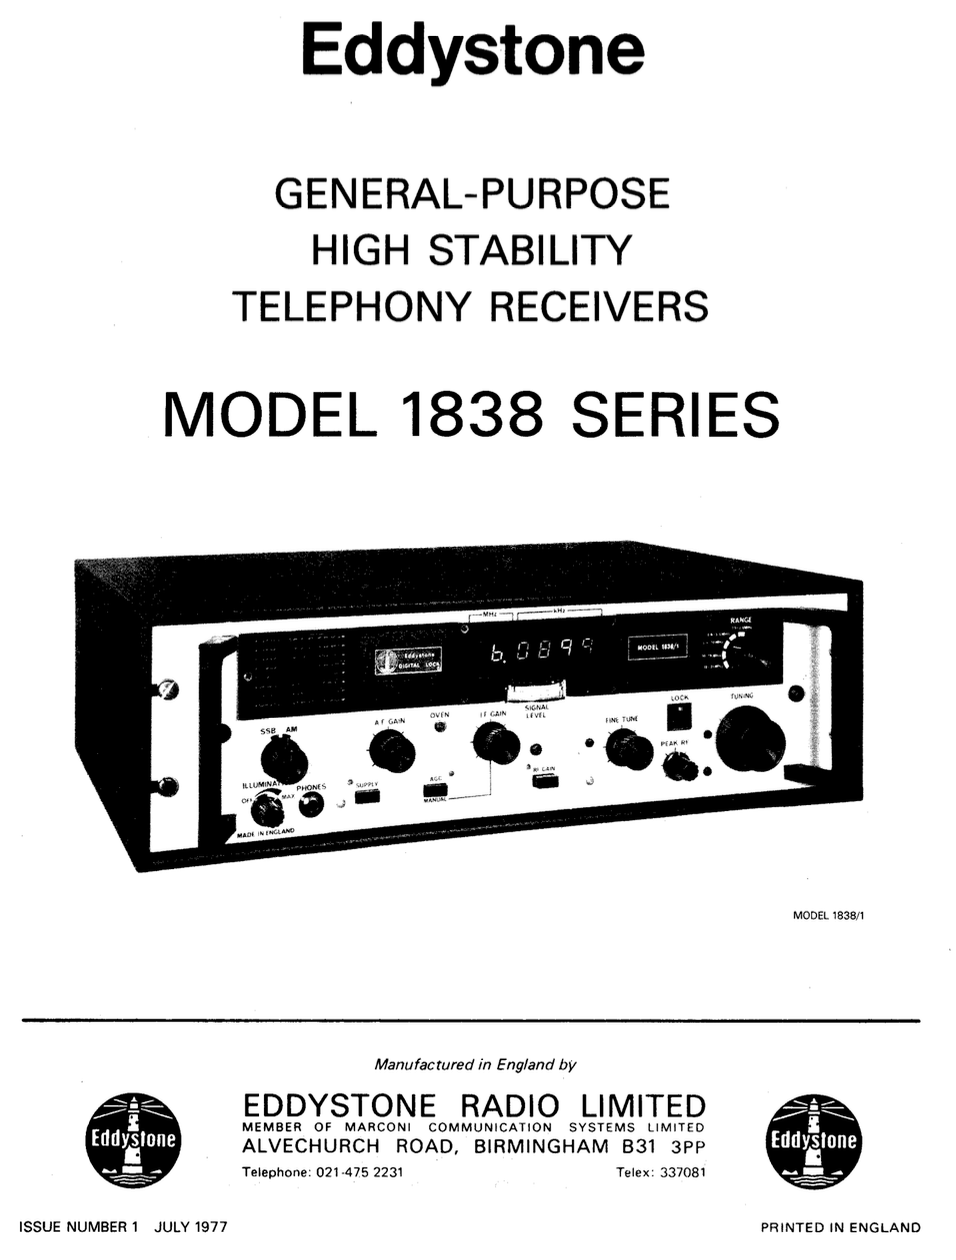 Eddystone Type 1838/1 General Purpose High Stability Telephony Receiver - Instruction Manual